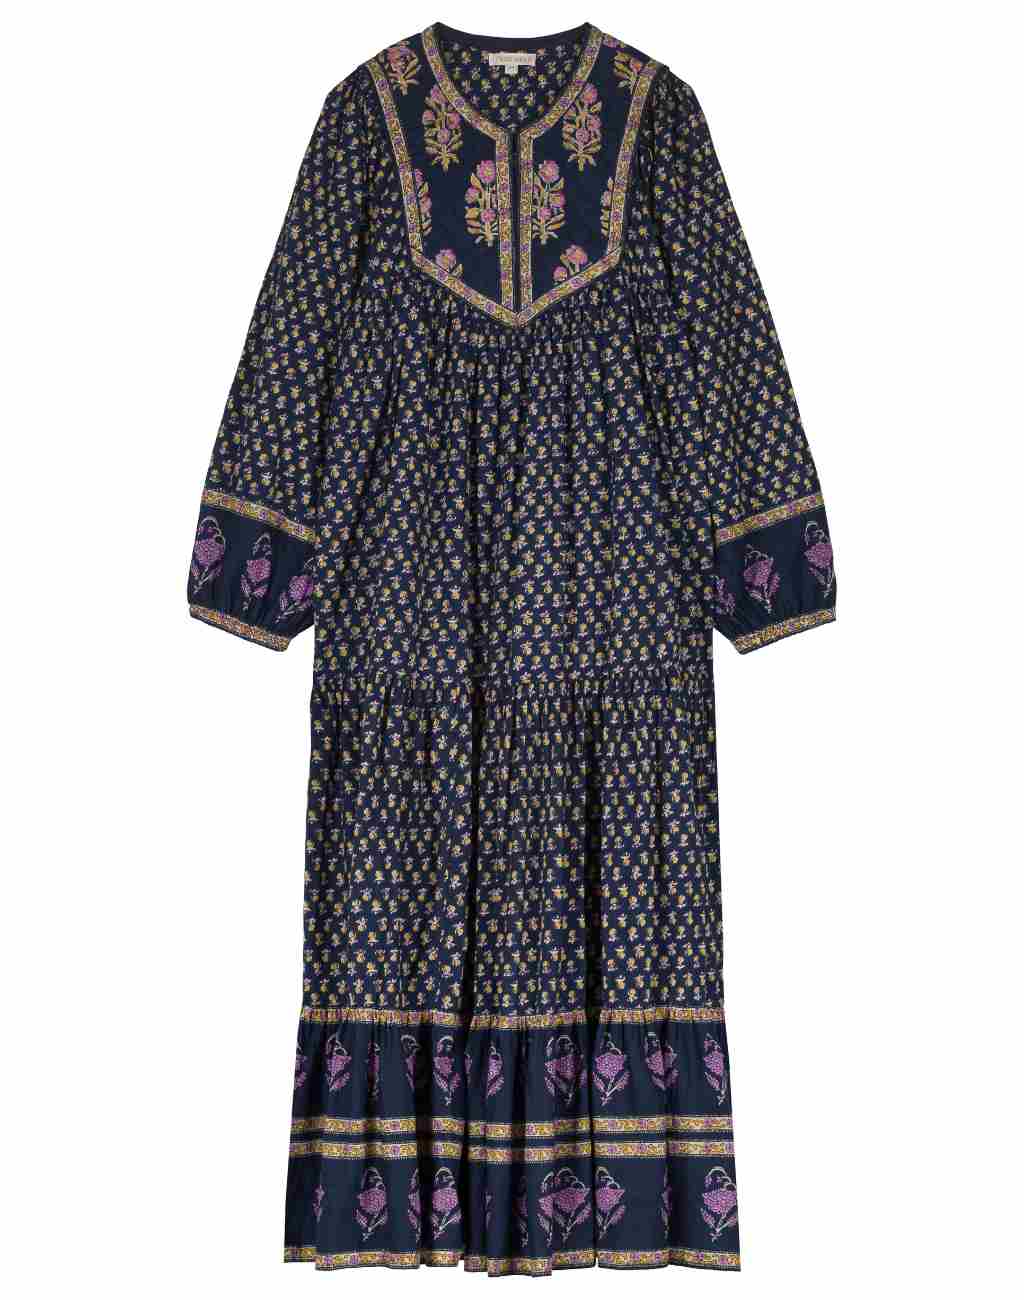 Gypsy Block Print Maxi Dress with Quilted Yoke and Balloon Sleeves